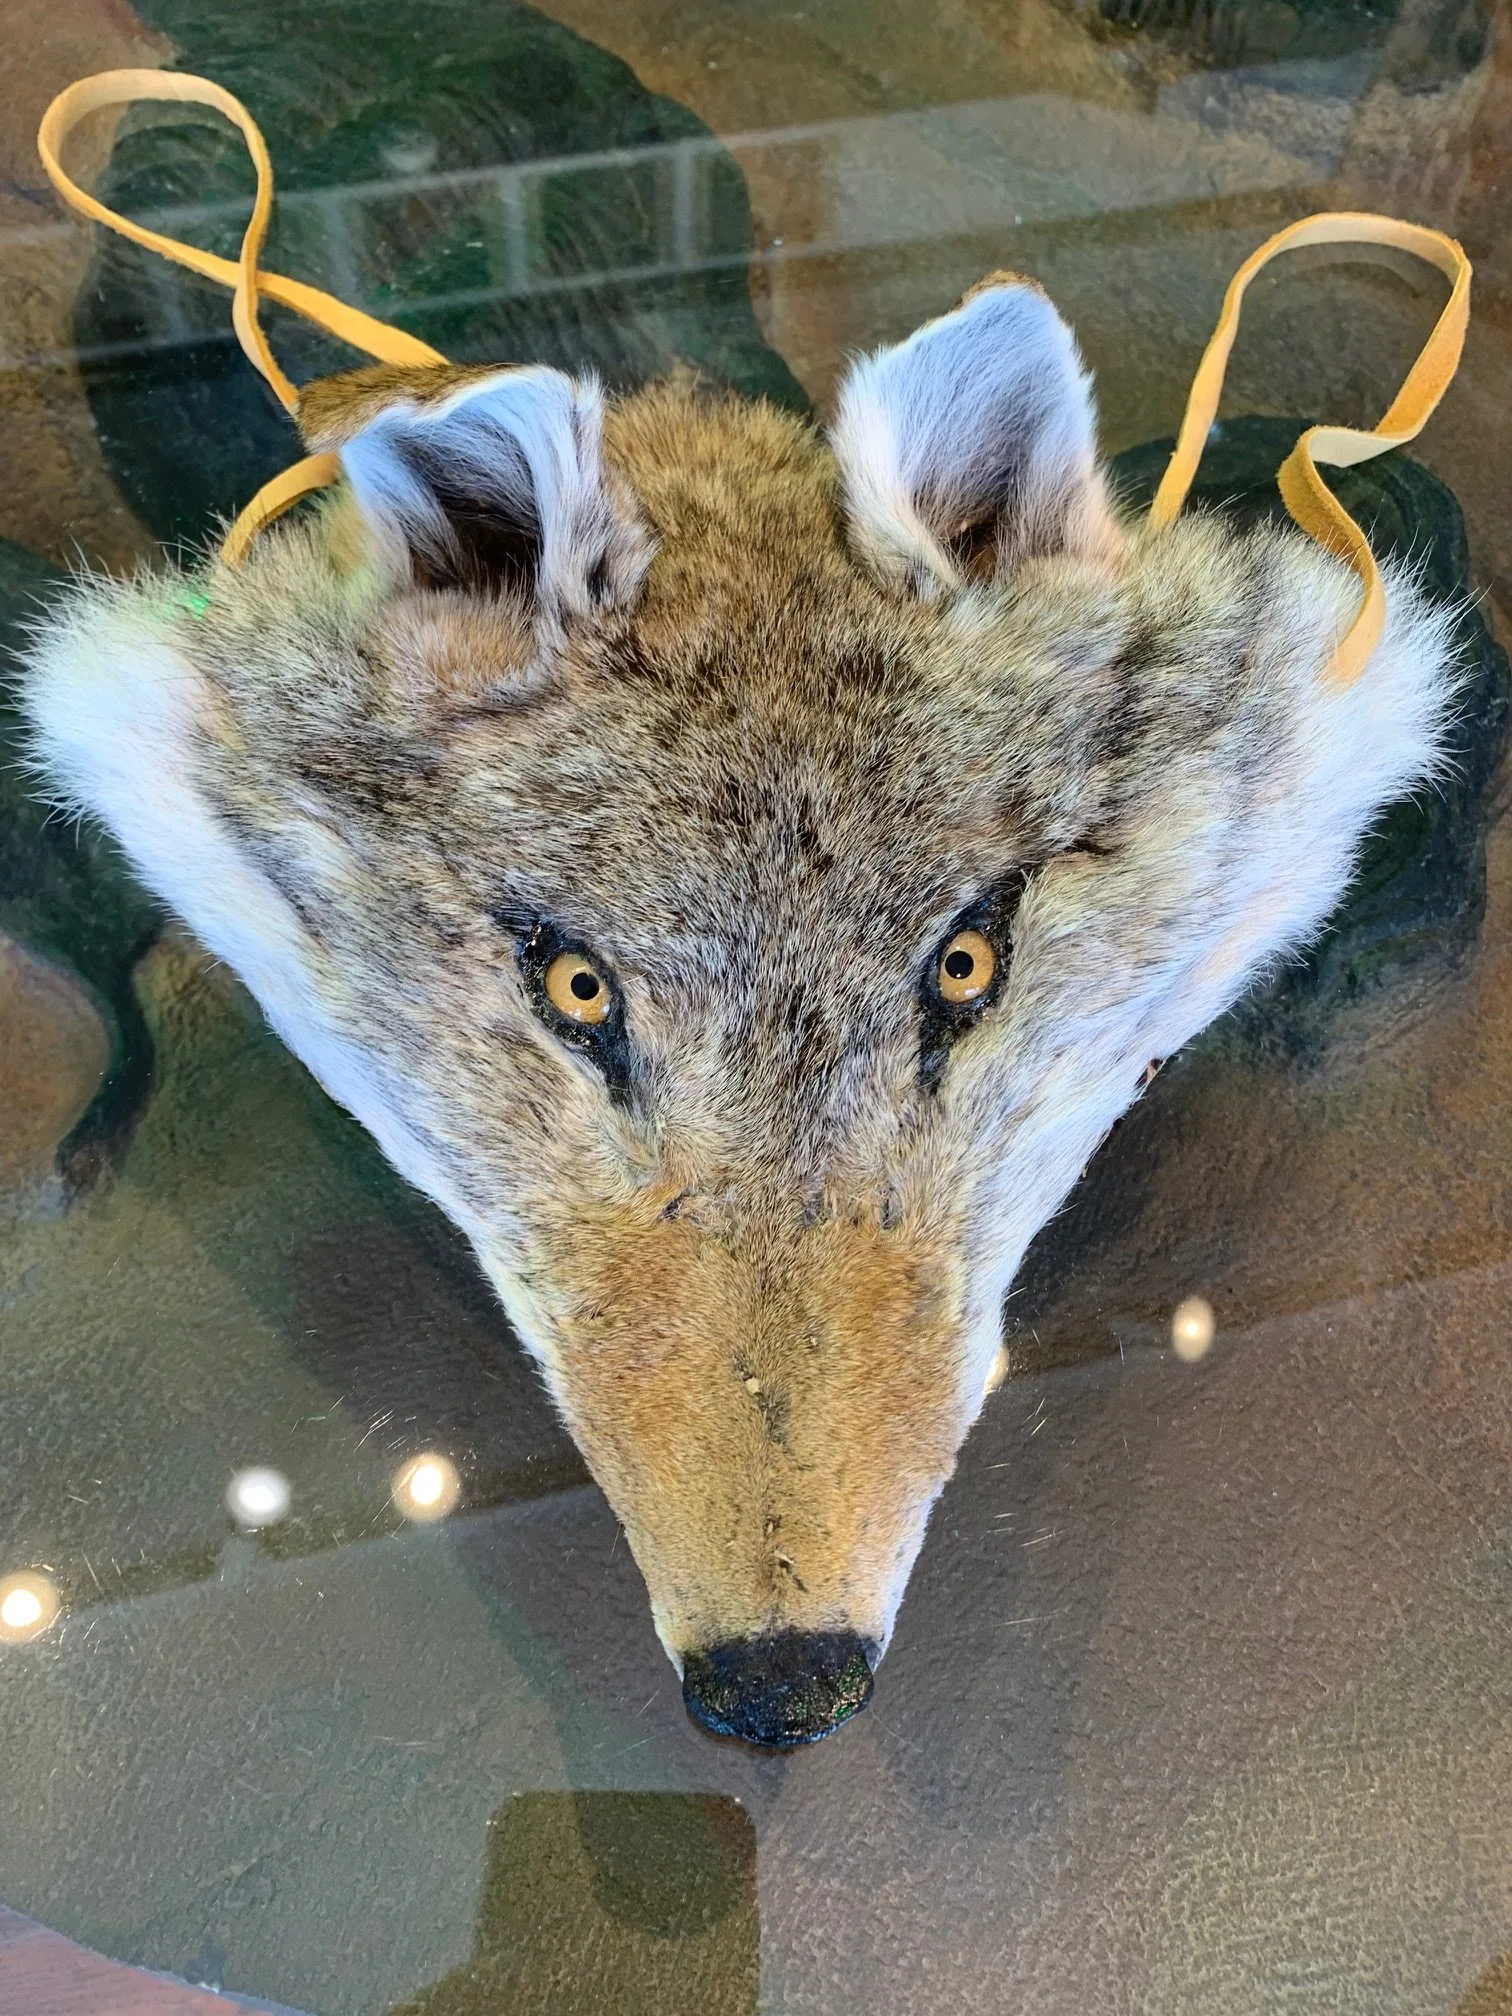 Coyote mask/head covering Professional Taxidermy Prehistoric Online